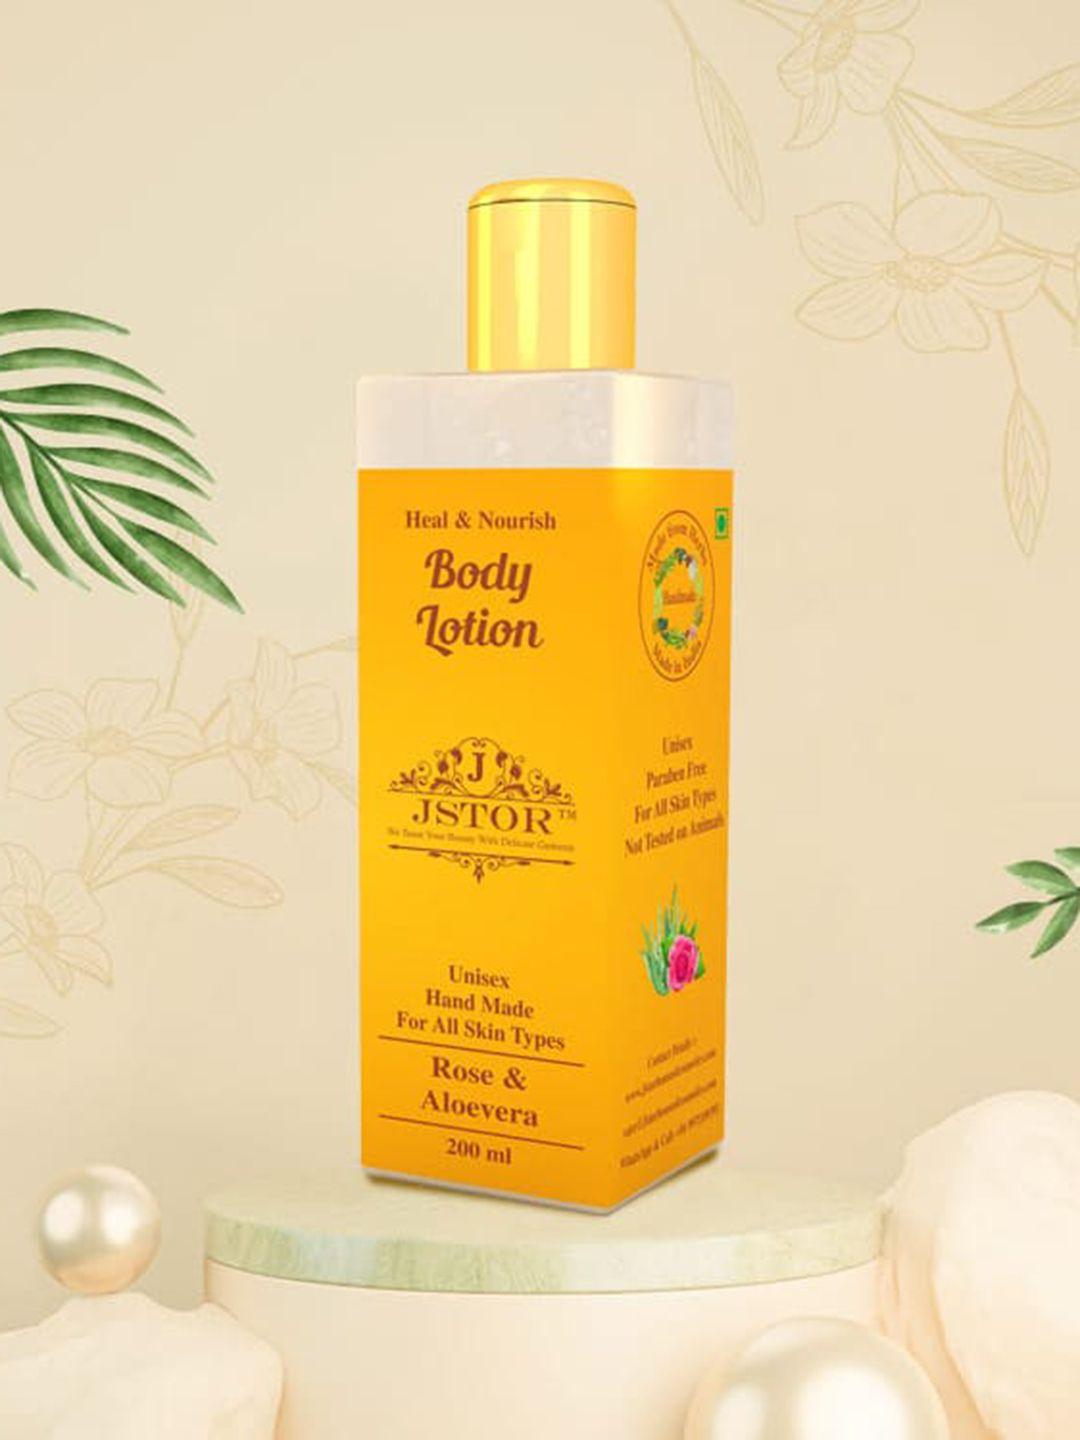 jstor herbs & flowers extract body lotion